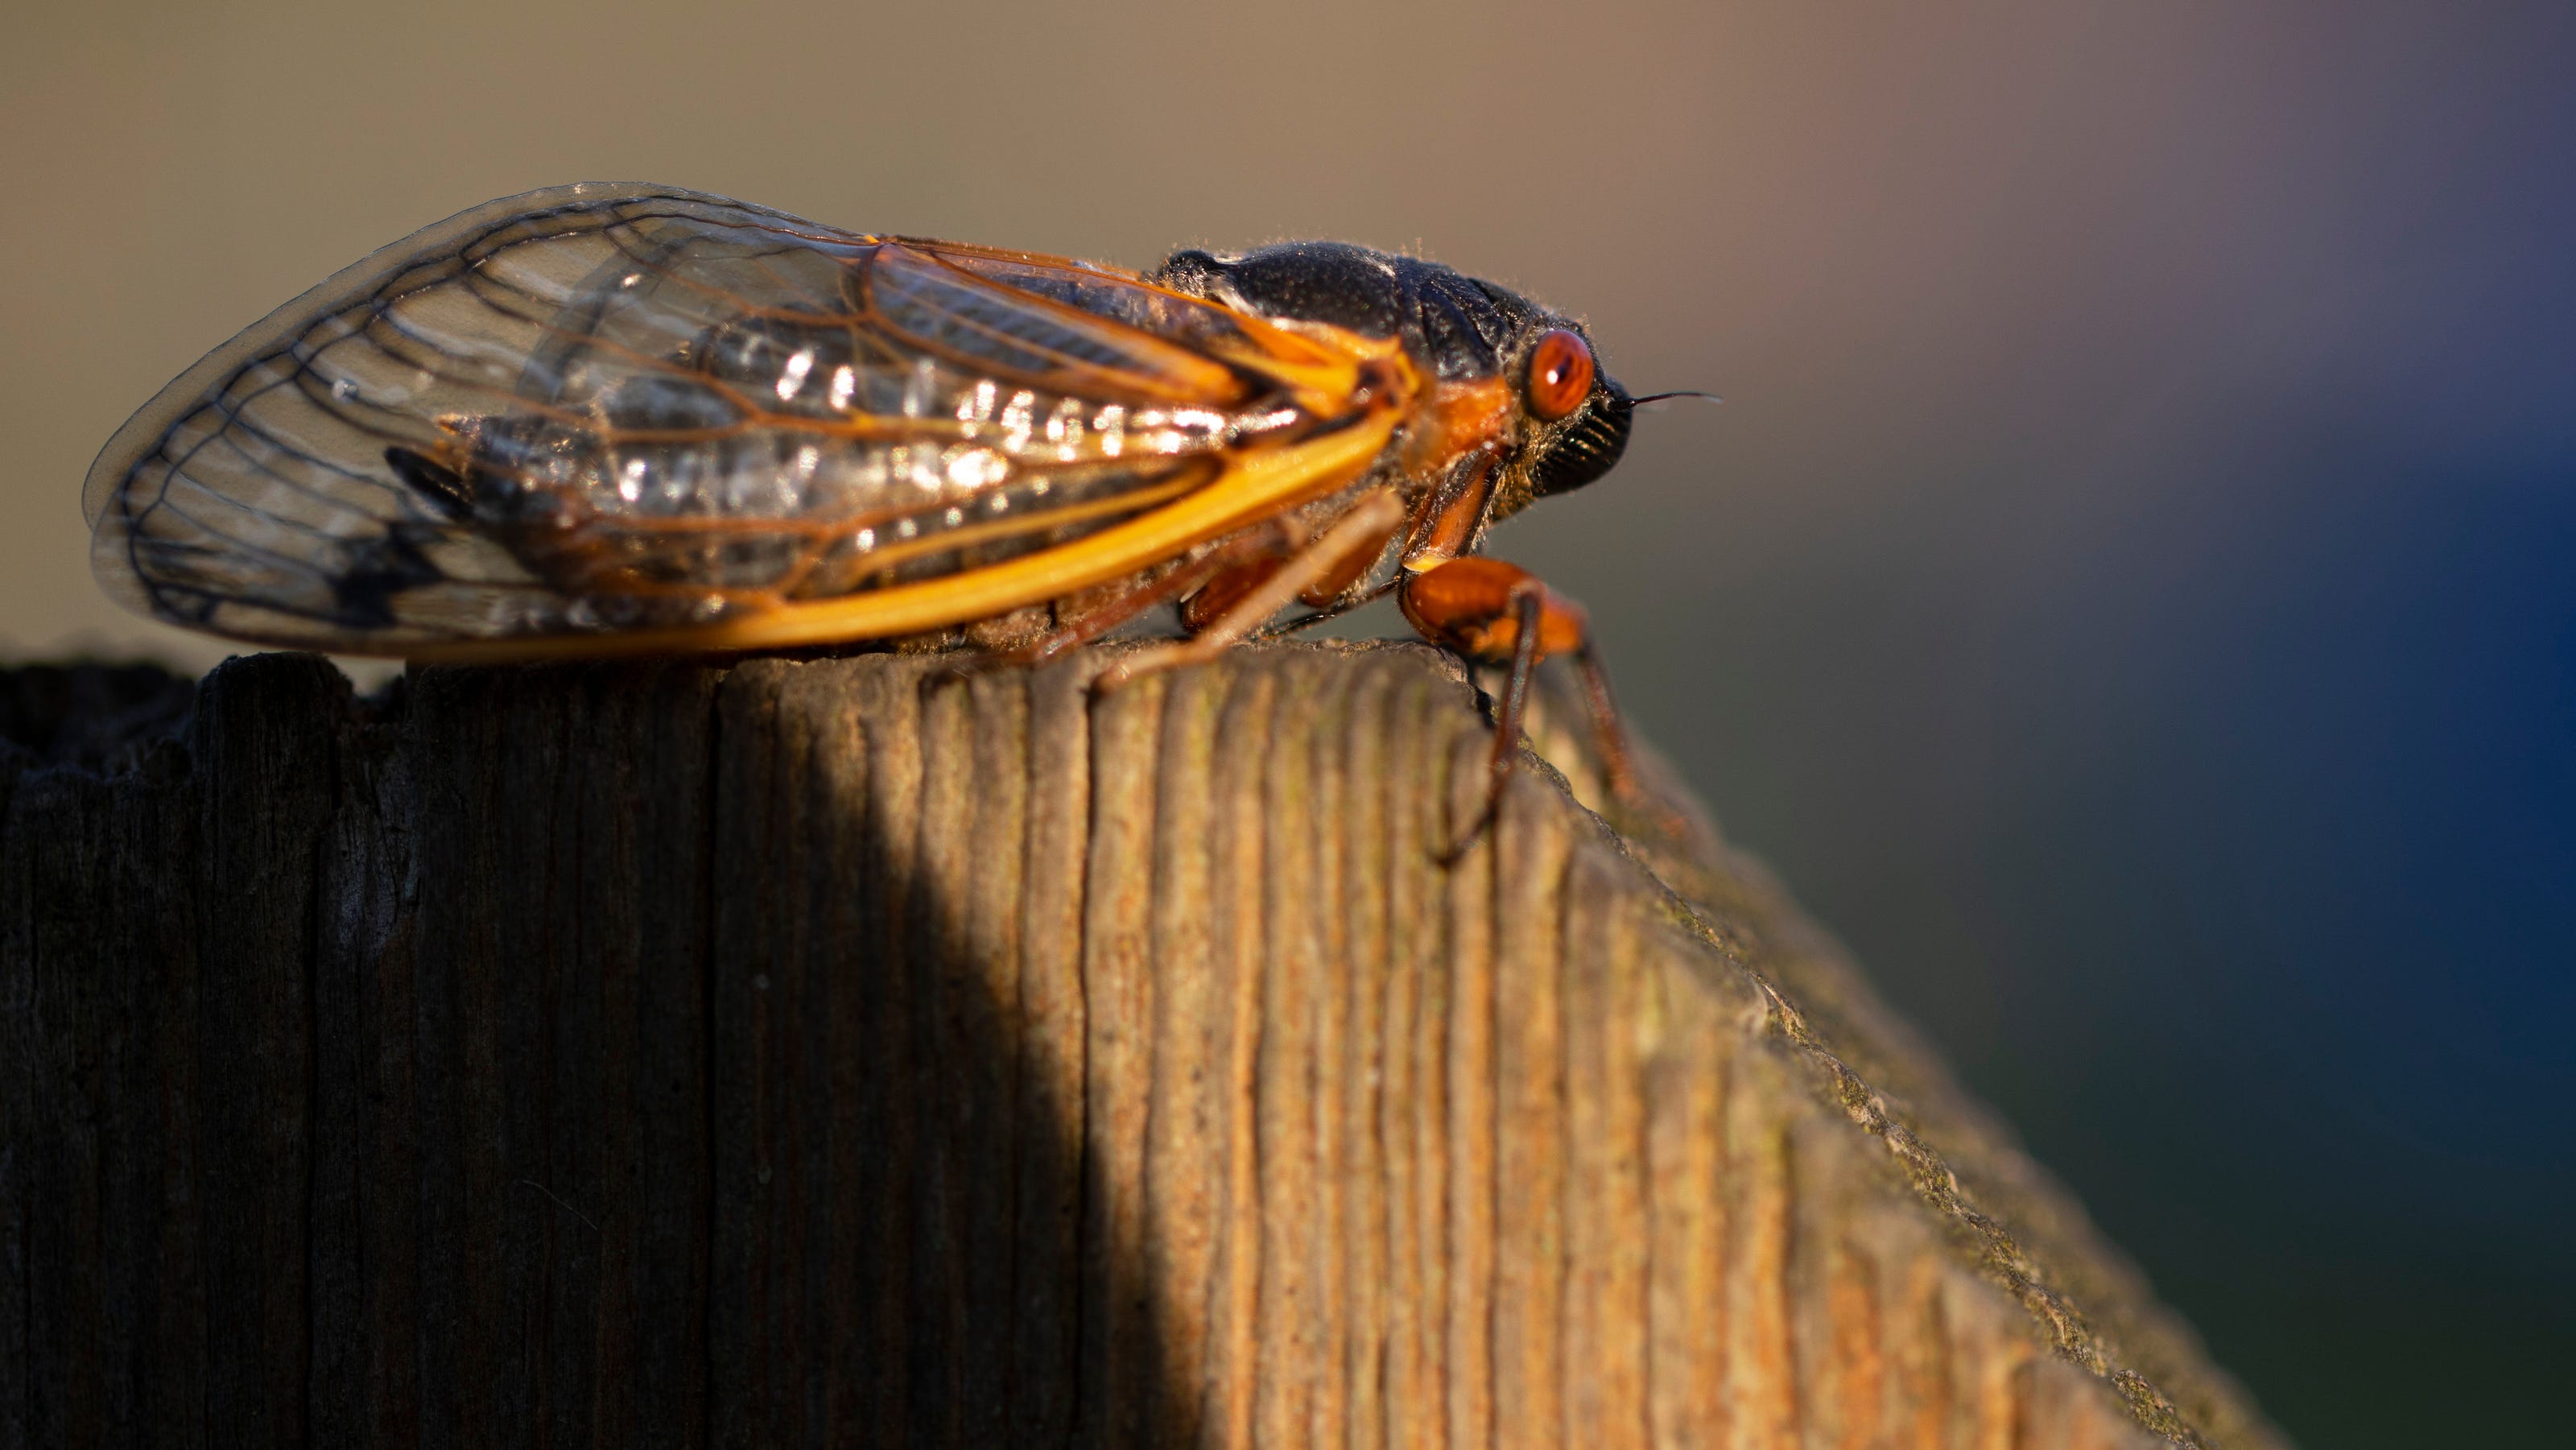 Cicadas have existed for more than 5 million years. Now, humans threaten their future. - IndyStar